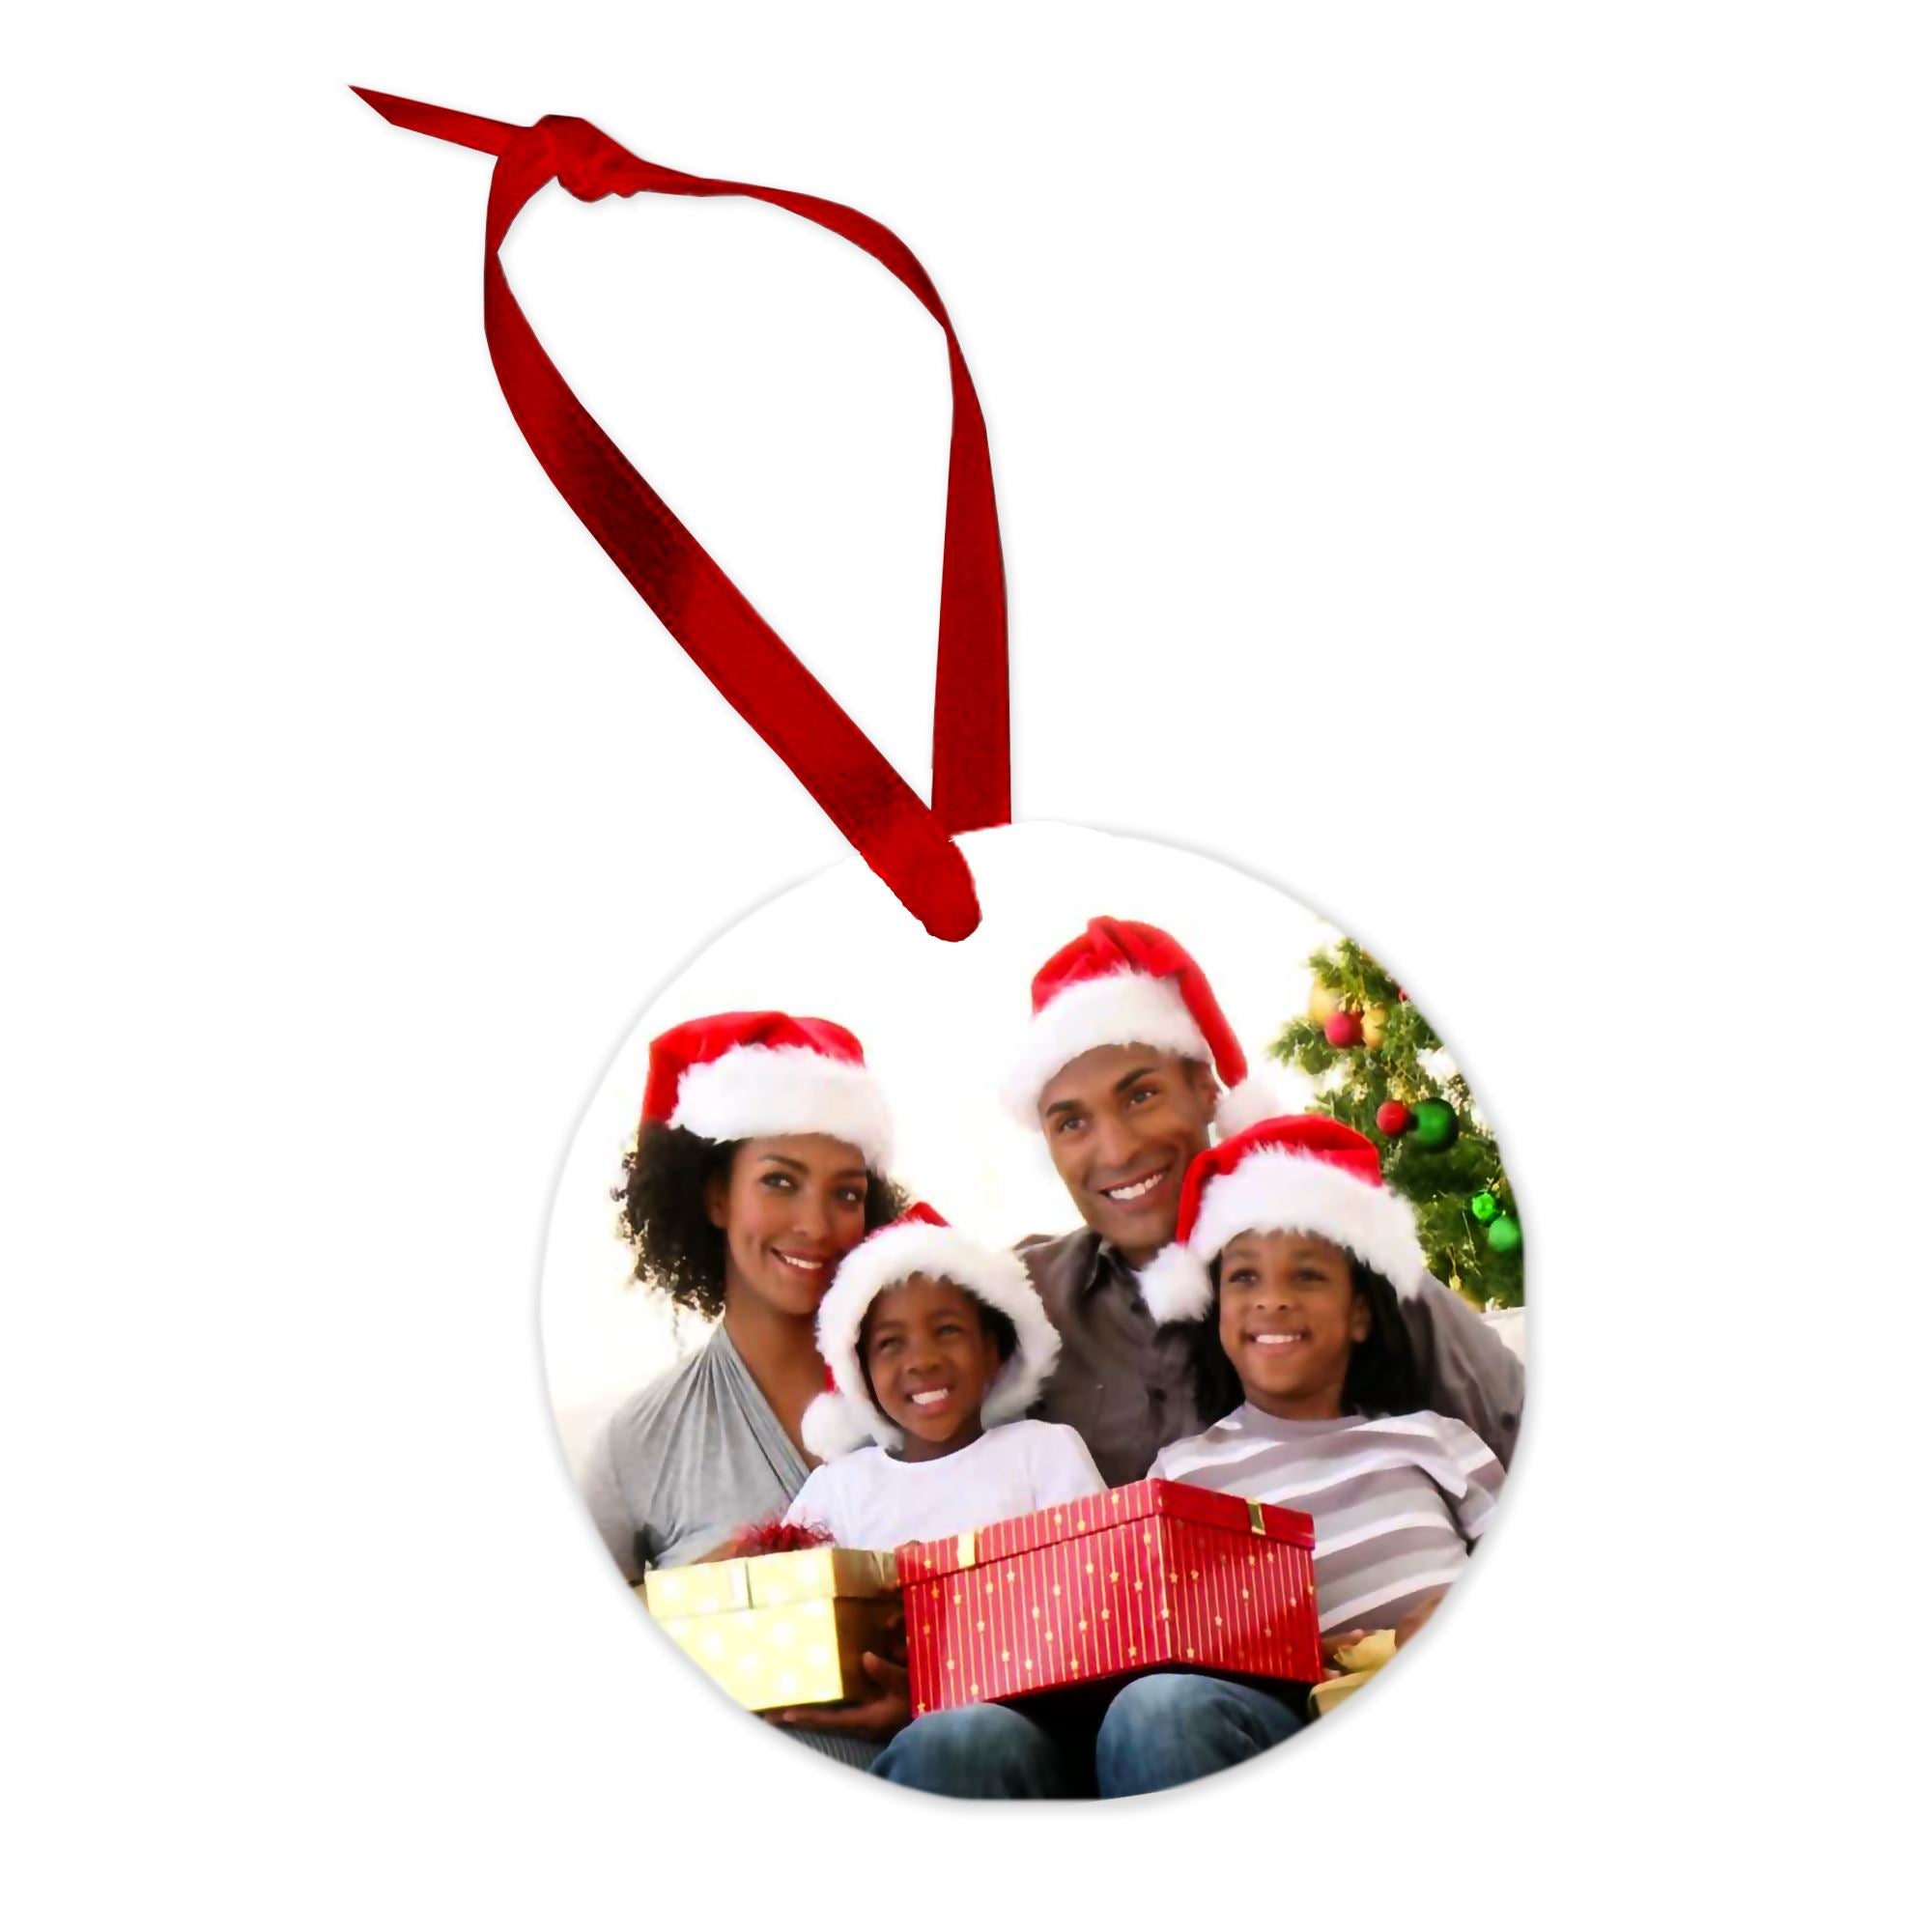 Unisub Round Sublimation Ornaments With White Ribbons White Gloss